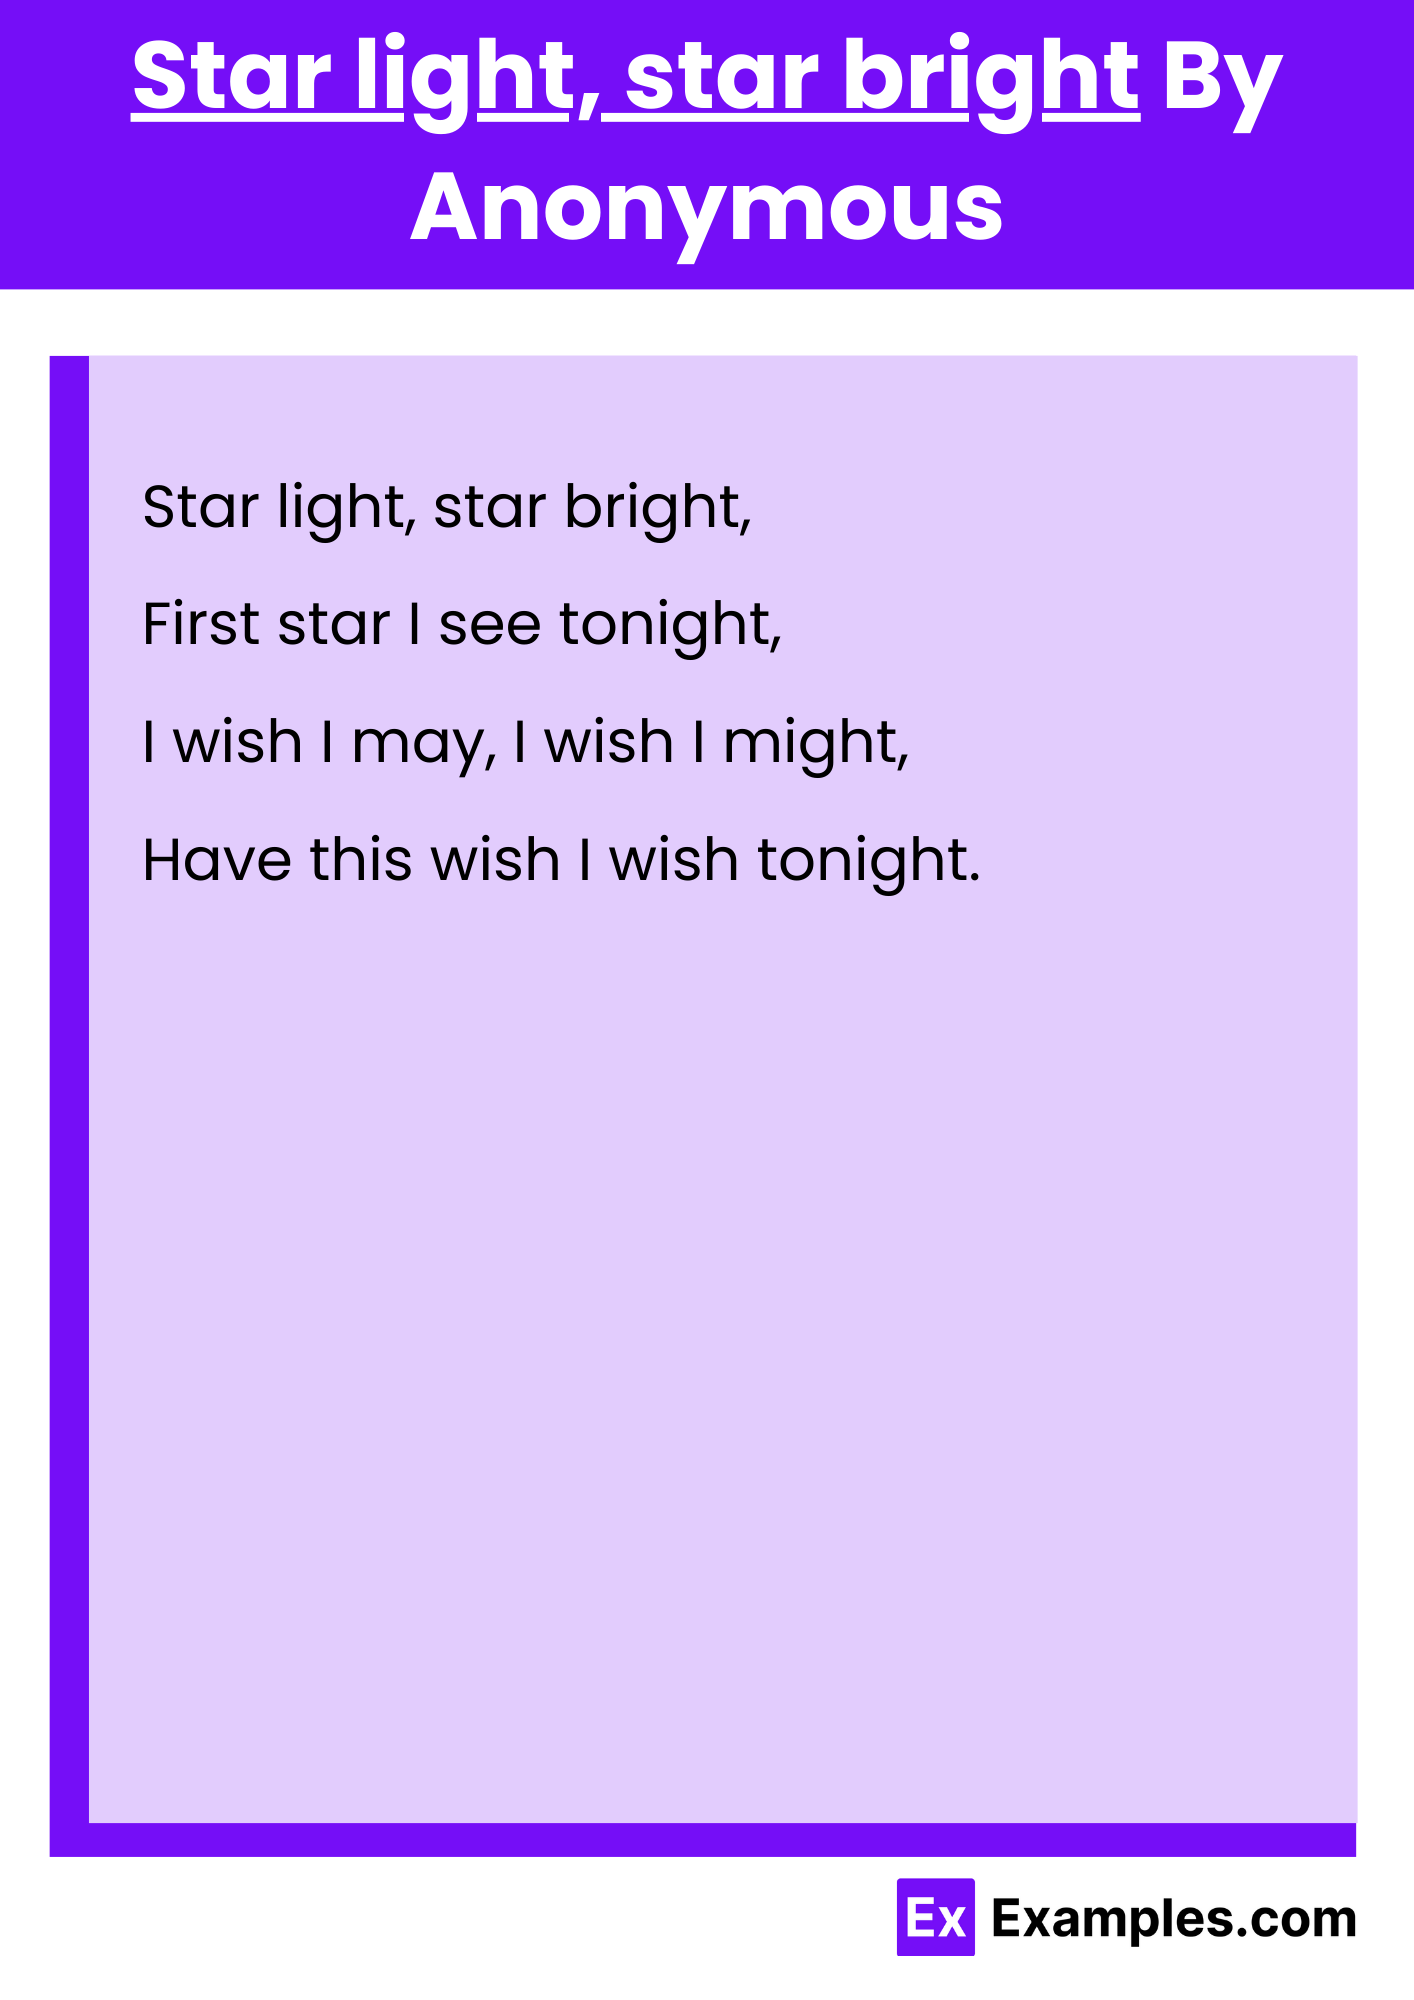 Star light, star bright By Anonymous